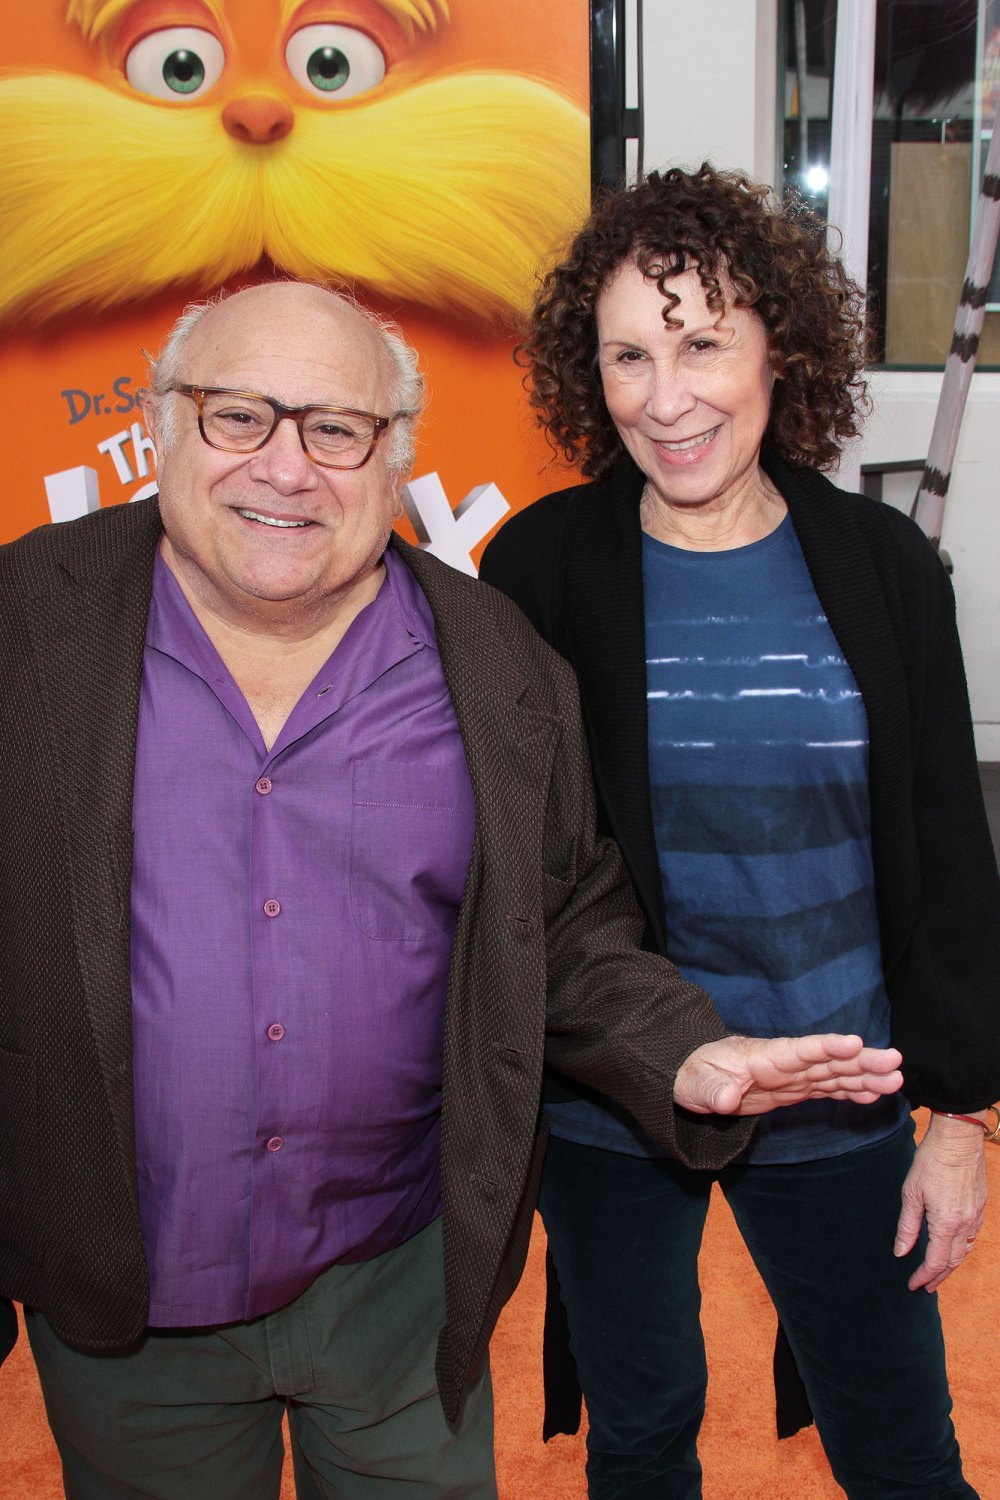 Danny DeVito on Strained Rhea Perlman Marriage: “We’re Working on It”